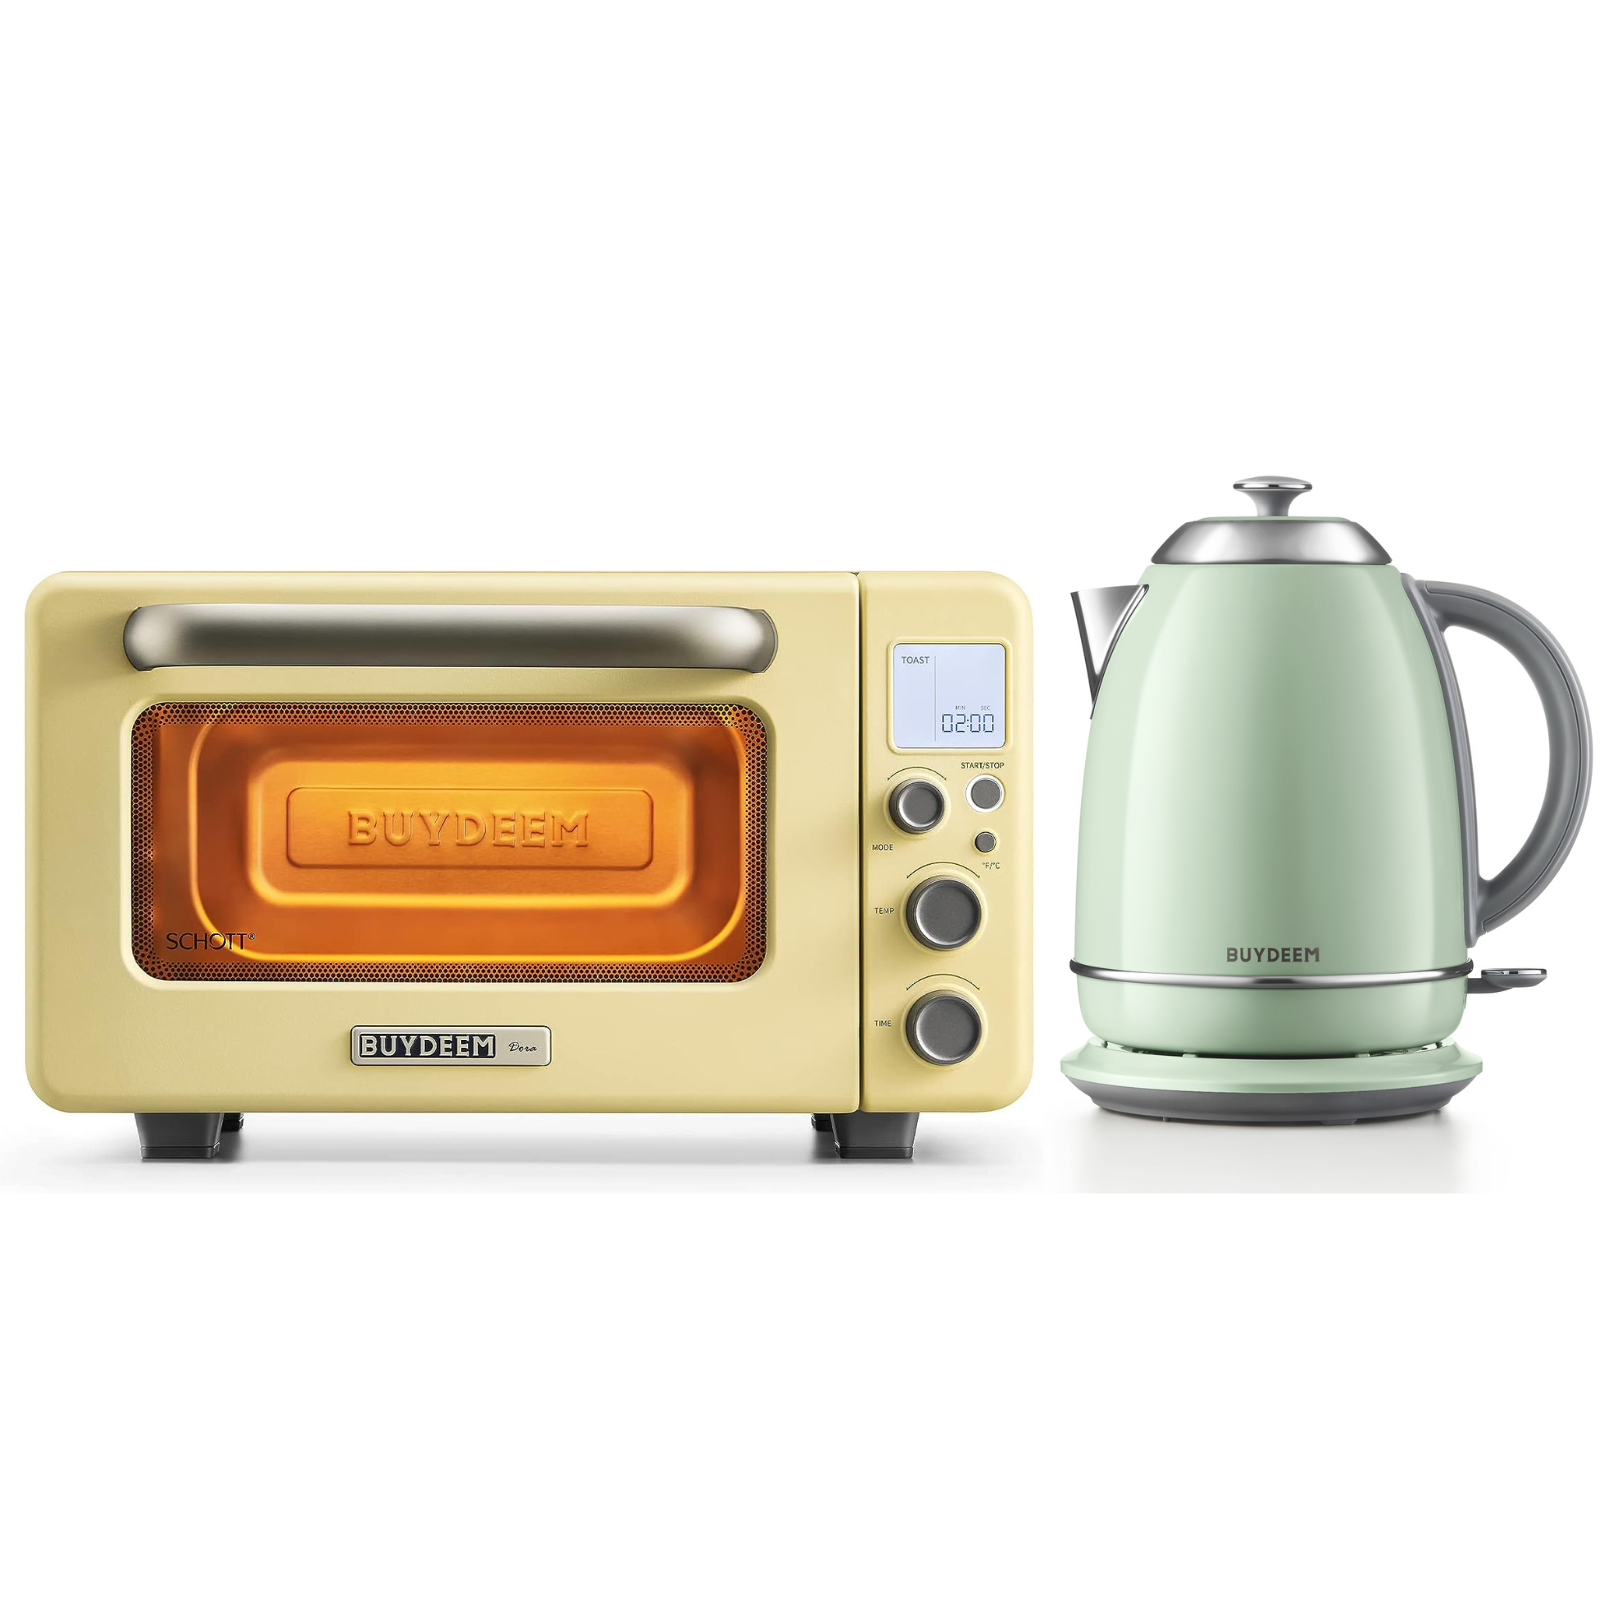 DORA Mini Oven T10 with Electric Kettle K640